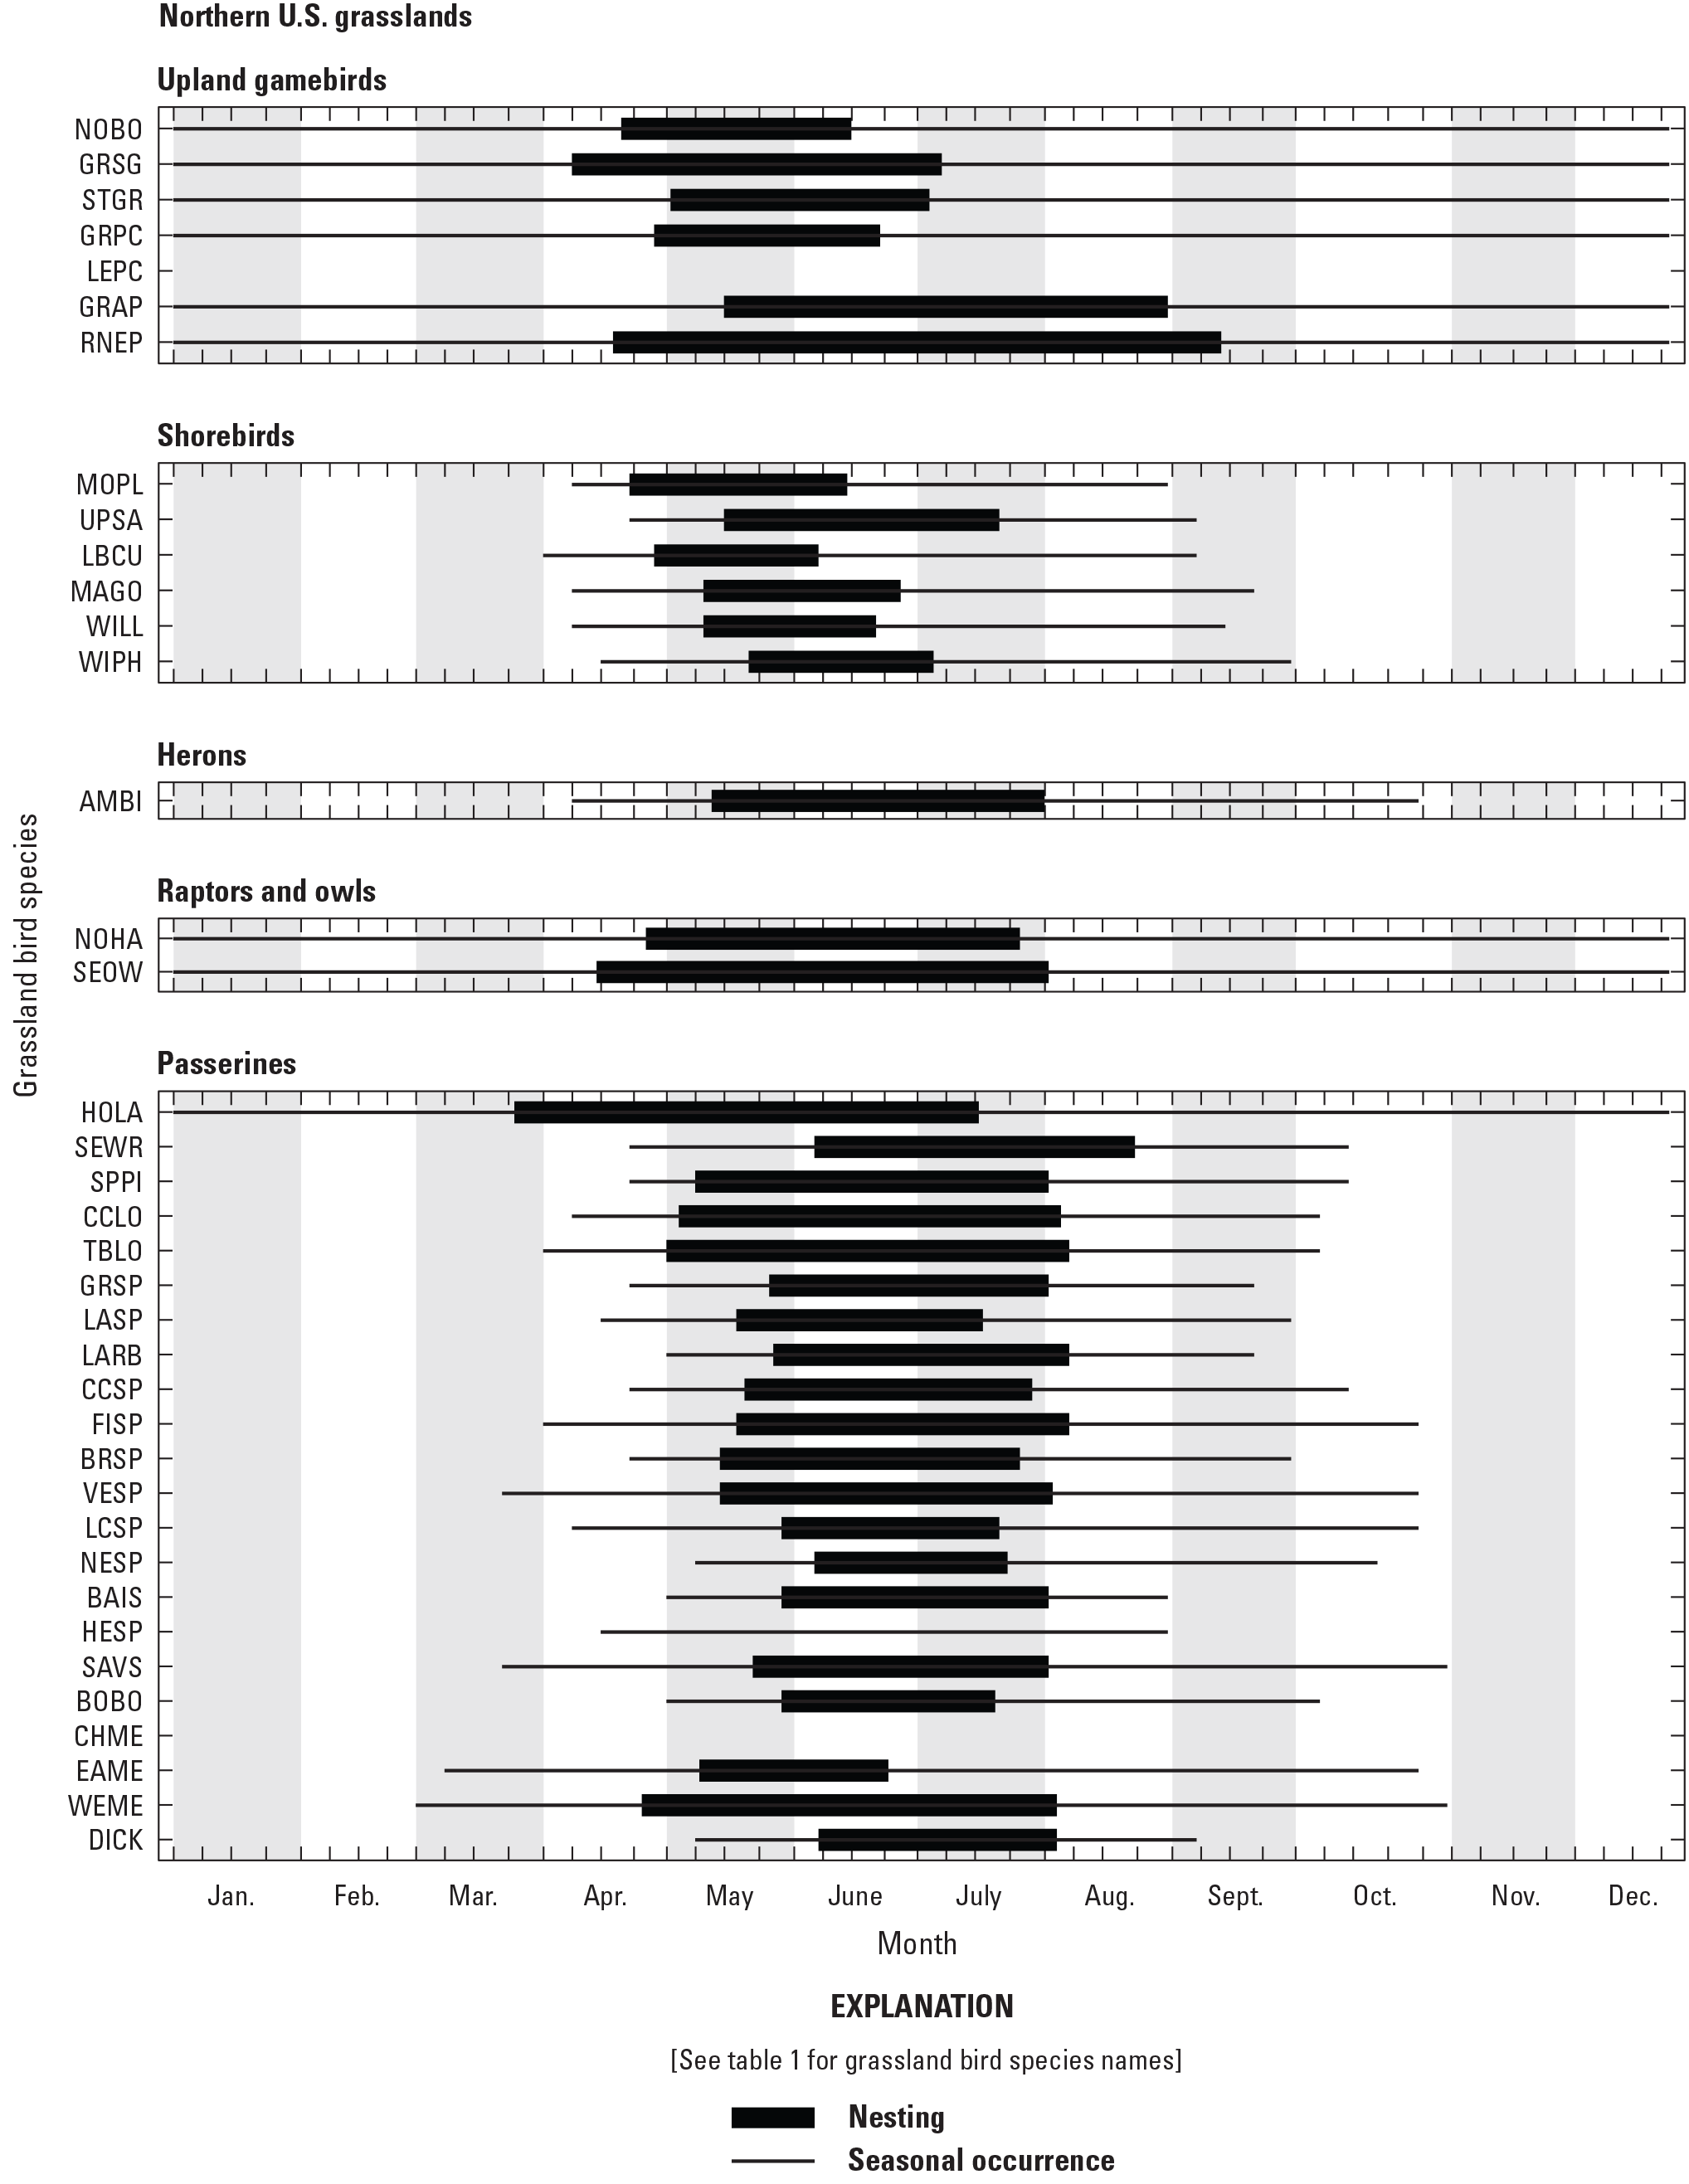 Figure showing seasonal occurrence and nesting phenology for 38 grassland bird species
                     in the northern U.S. grasslands.